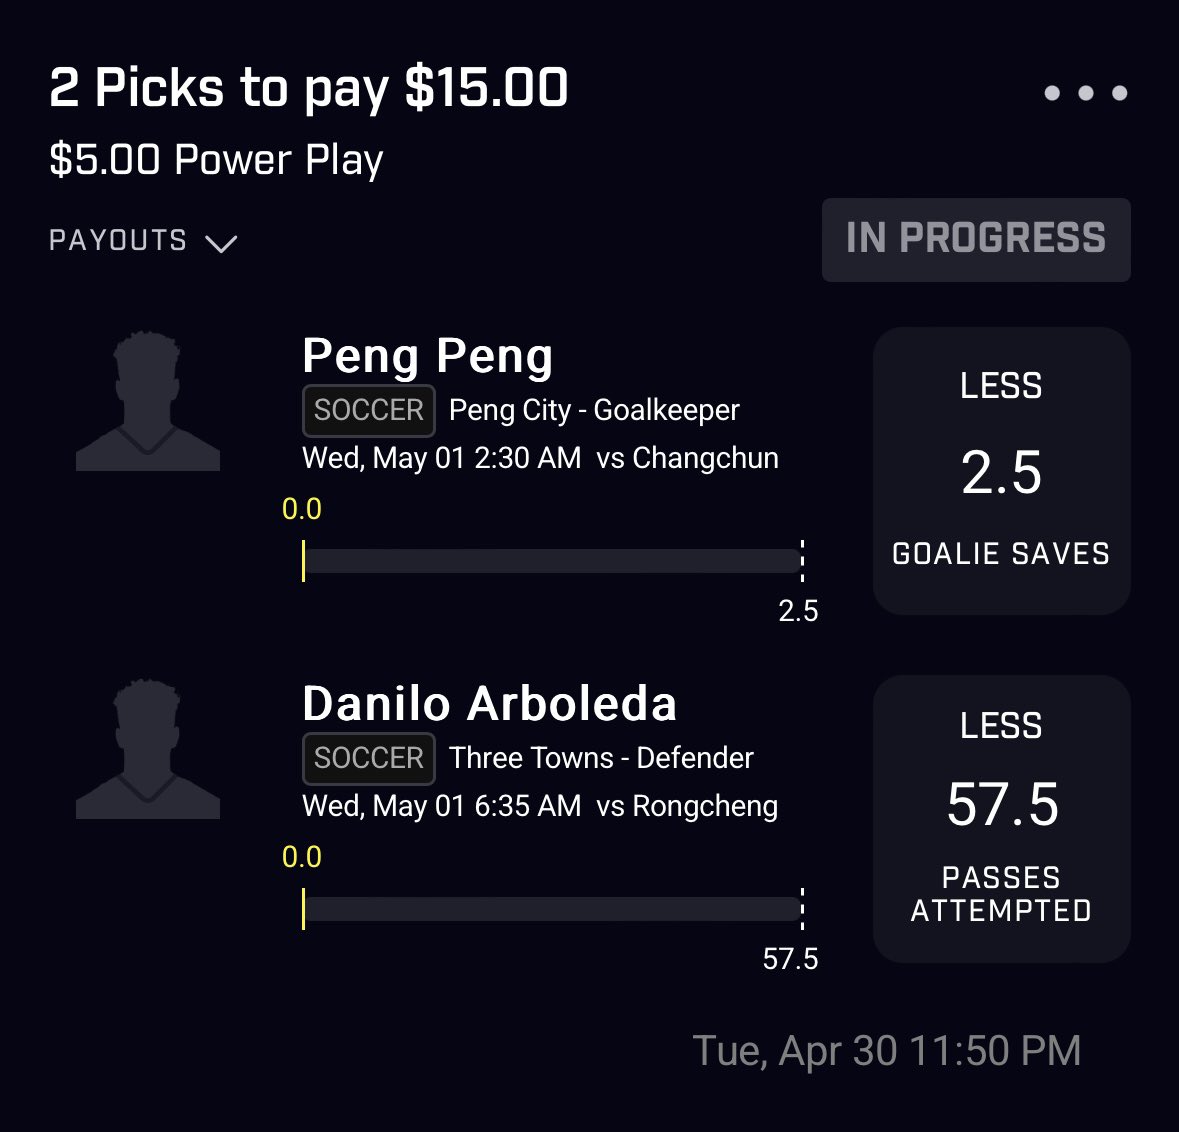 🔥WAKE N CASH🔥

Let’s cash a second one in a row!💰💯

#PrizePicks #prizepickslocks #prizepickslocks #PrizepicksSoccer #prizepicksPotd #PrizePicksNBA #prizepickswinning #wakeandcash #wakencash